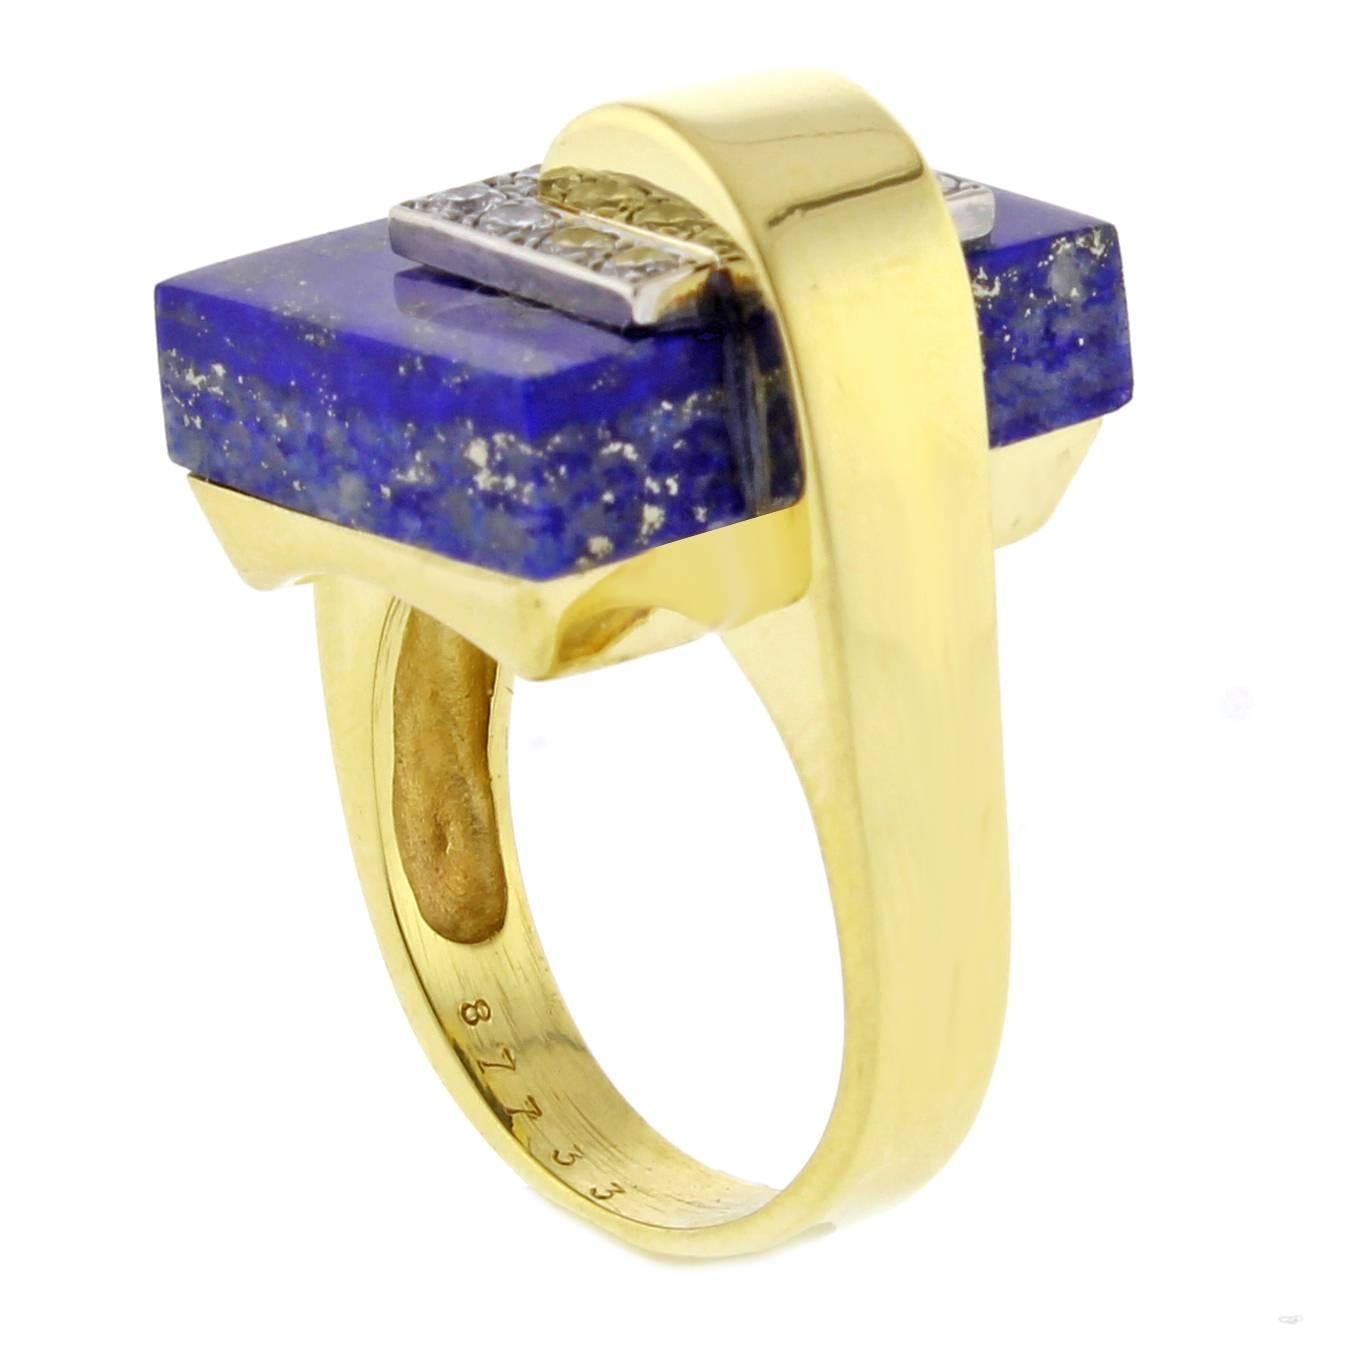 From Cartier, this  18 karat 1960s lapis and diamond ring. The ring features a  19.5*4.7 rectangular lapis and 10 brilliant diamonds weighing .30 carats Signed Cartier (partially obscured. Size 8.5 adjustable